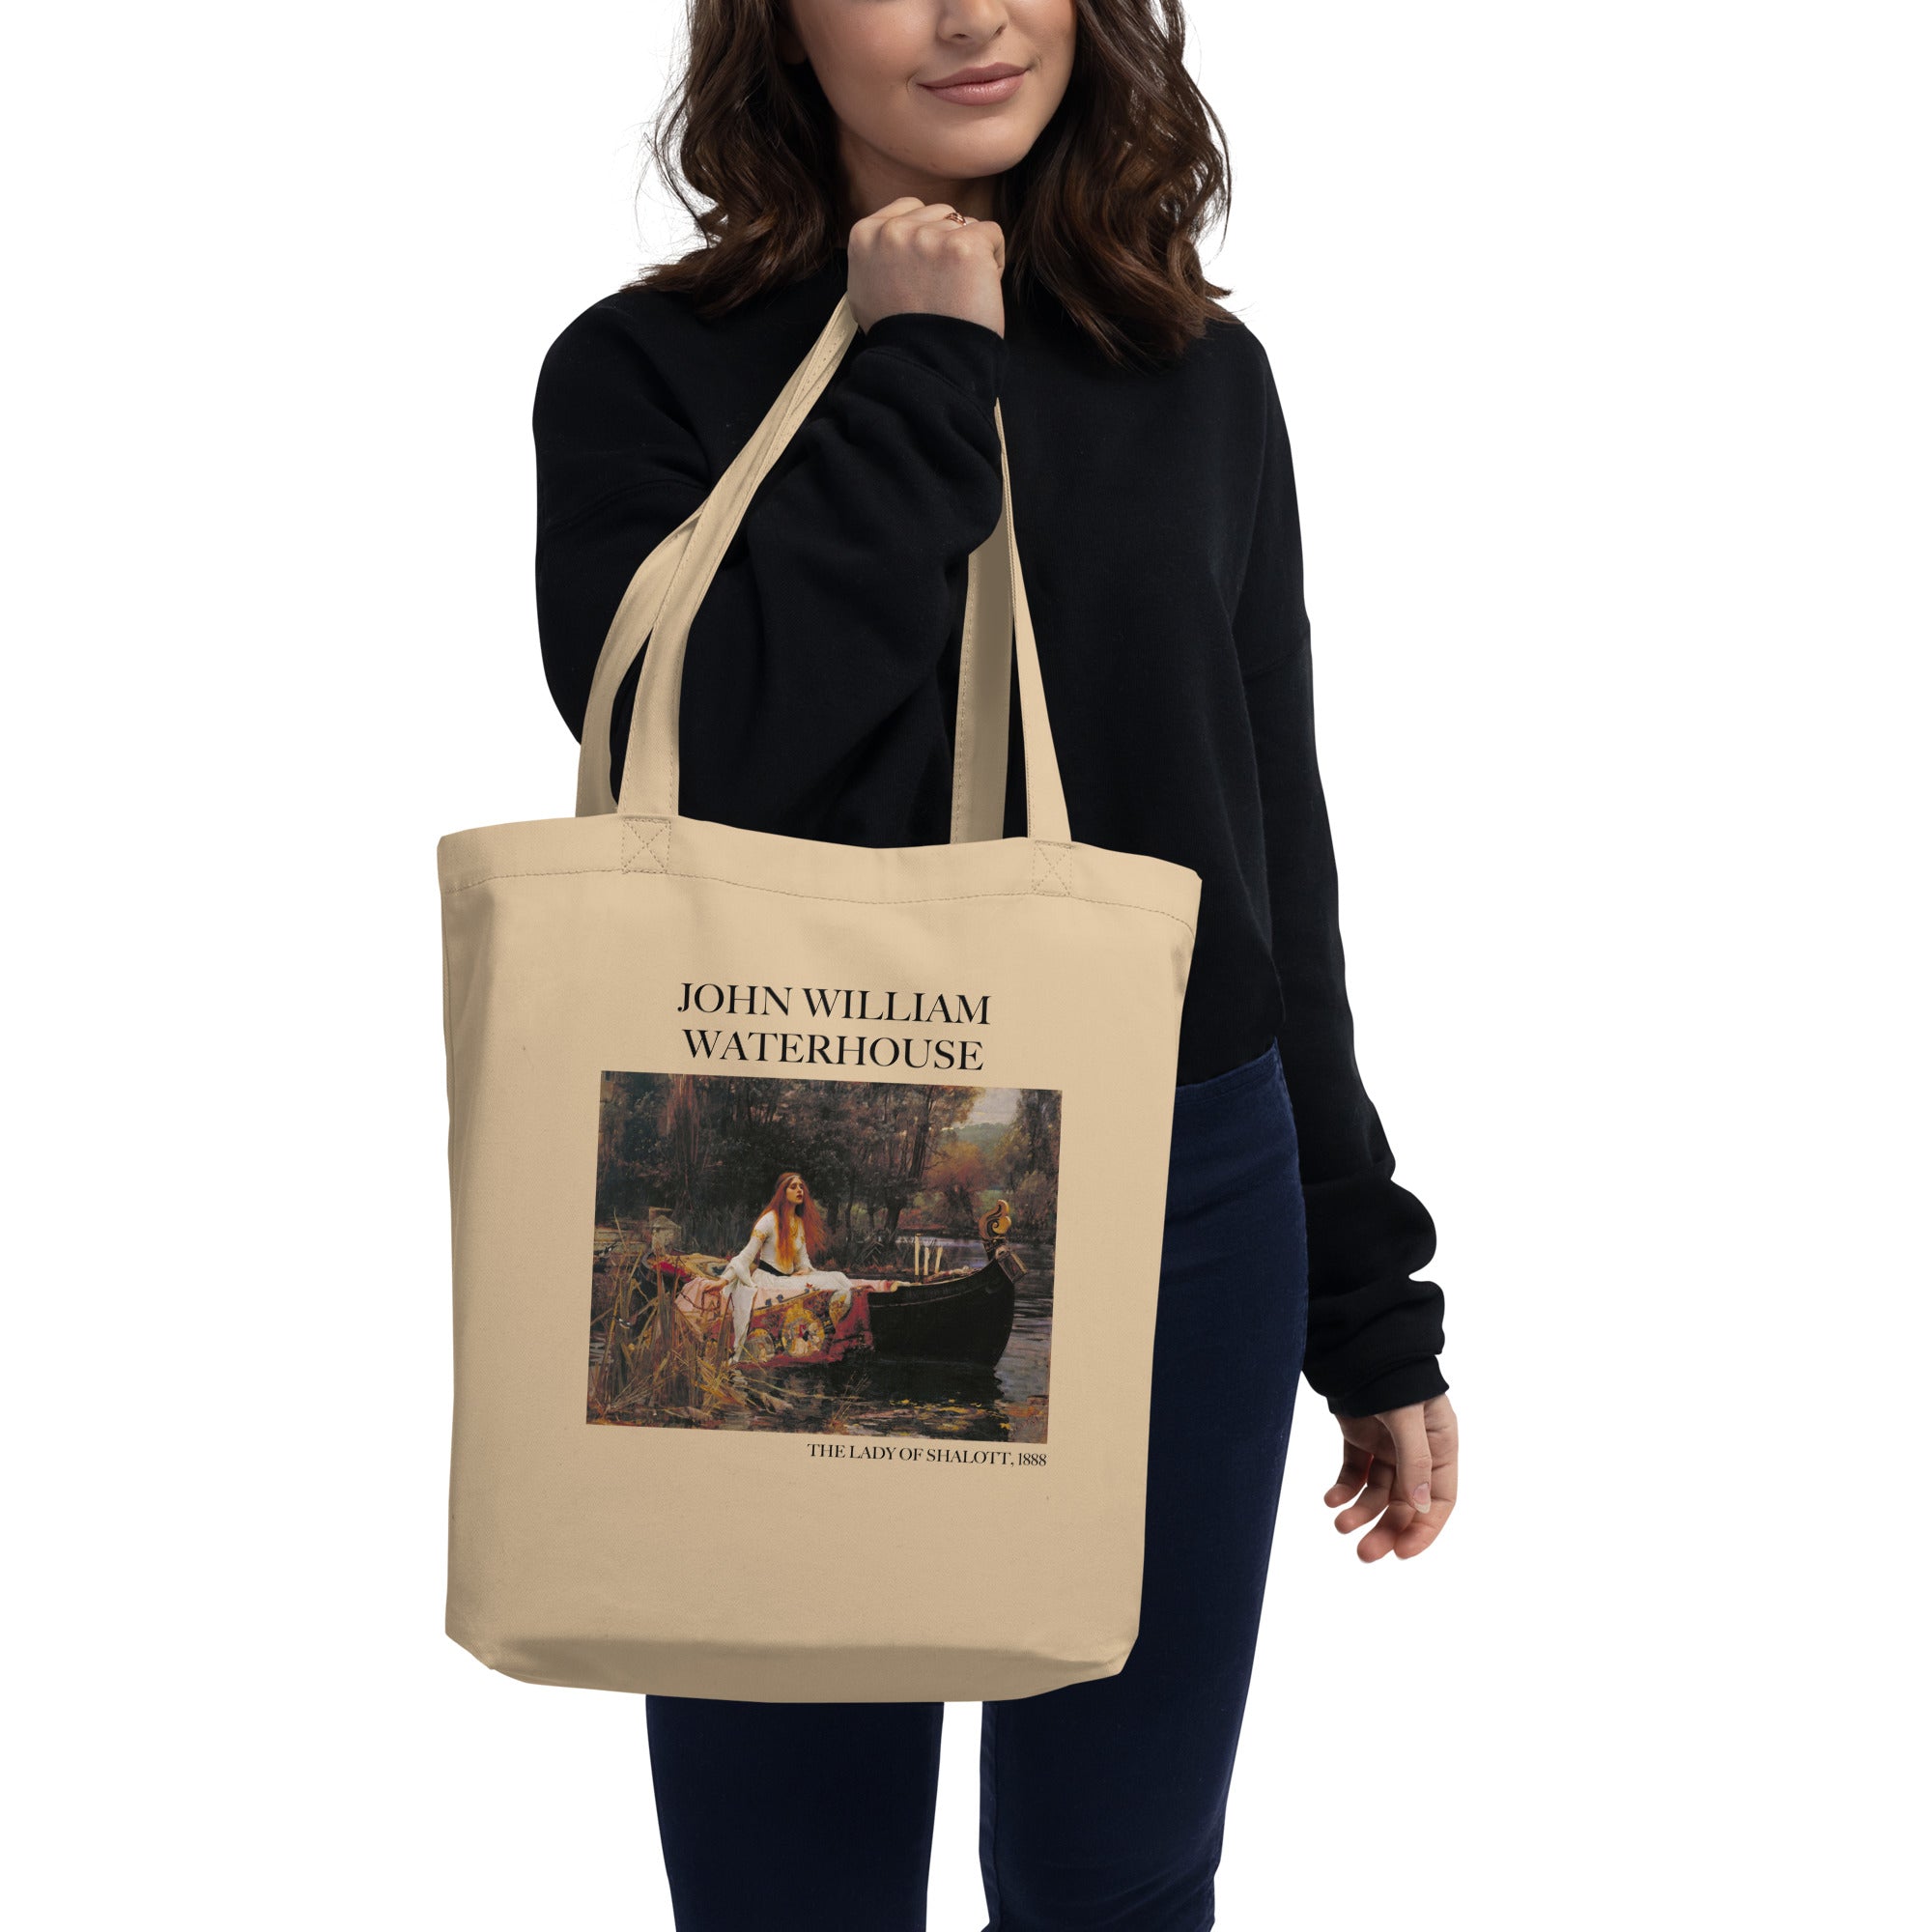 John William Waterhouse 'The Lady of Shalott' Famous Painting Totebag | Eco Friendly Art Tote Bag